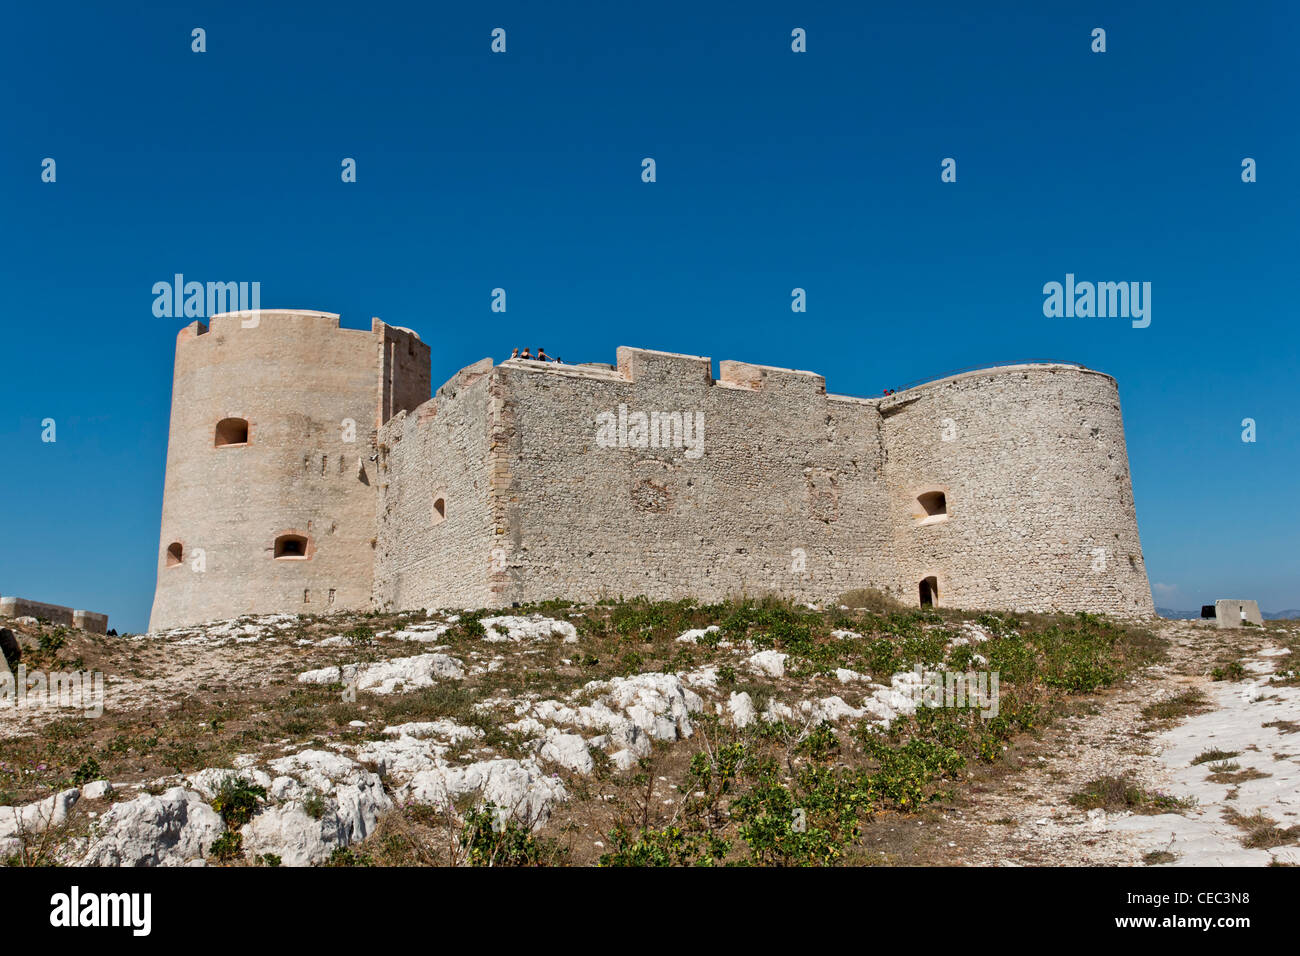 The château d'If, the Island Ile d'If, Prison of The Count of Monte Cristo according to Alexander Dumas, bay of Marseilles Stock Photo